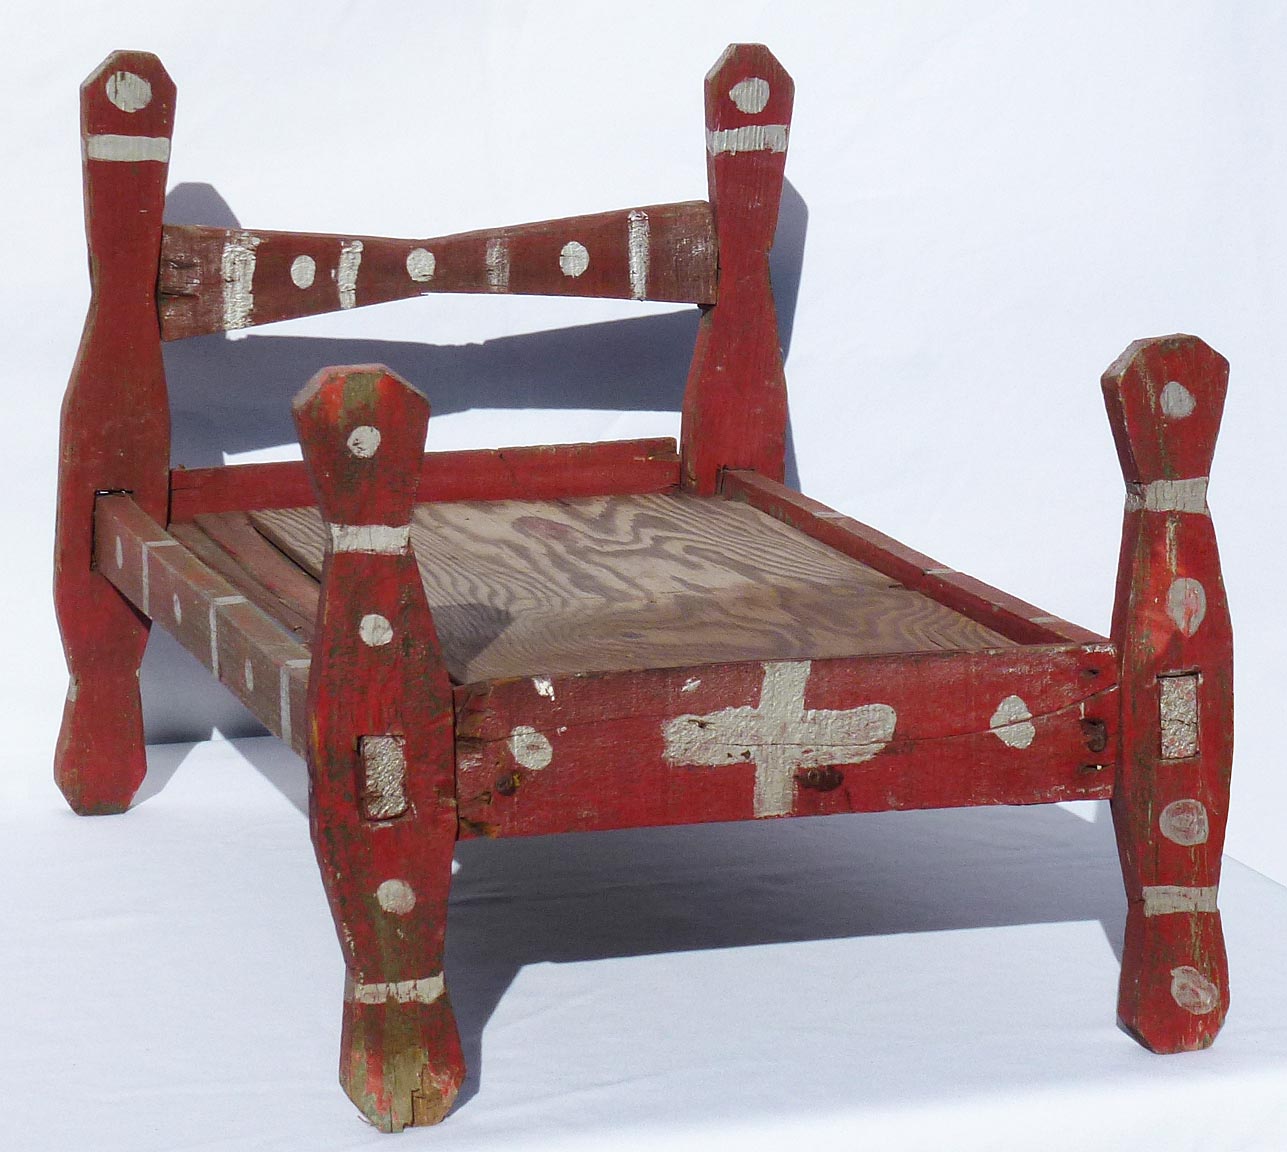 African-American Doll Bed